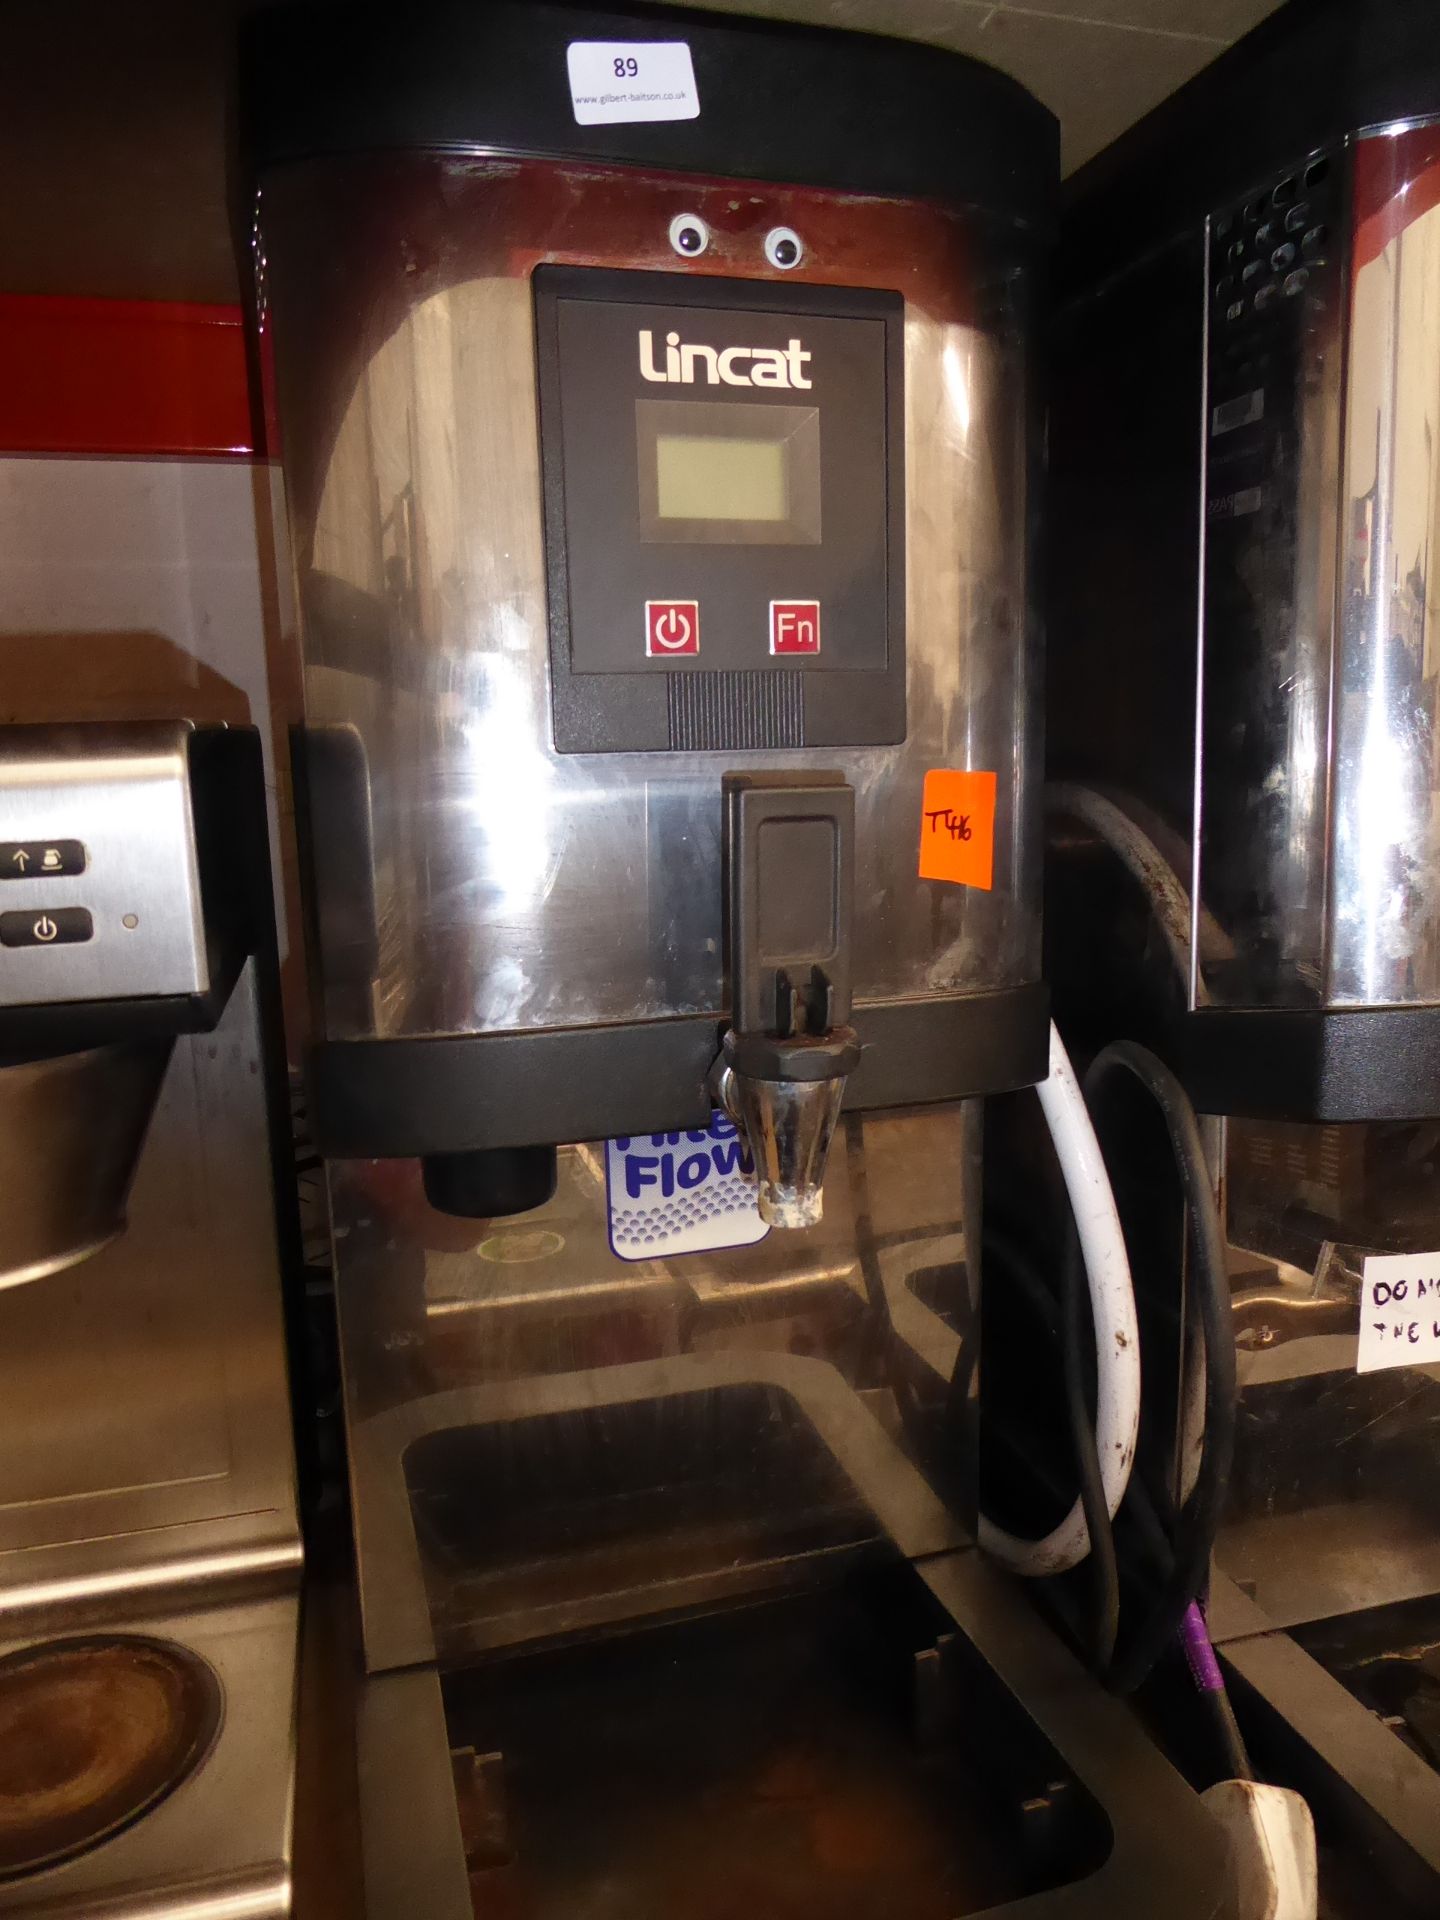 *Lincat hot water boiler - good condition direct from a national chain (280Wx470Dx650H)